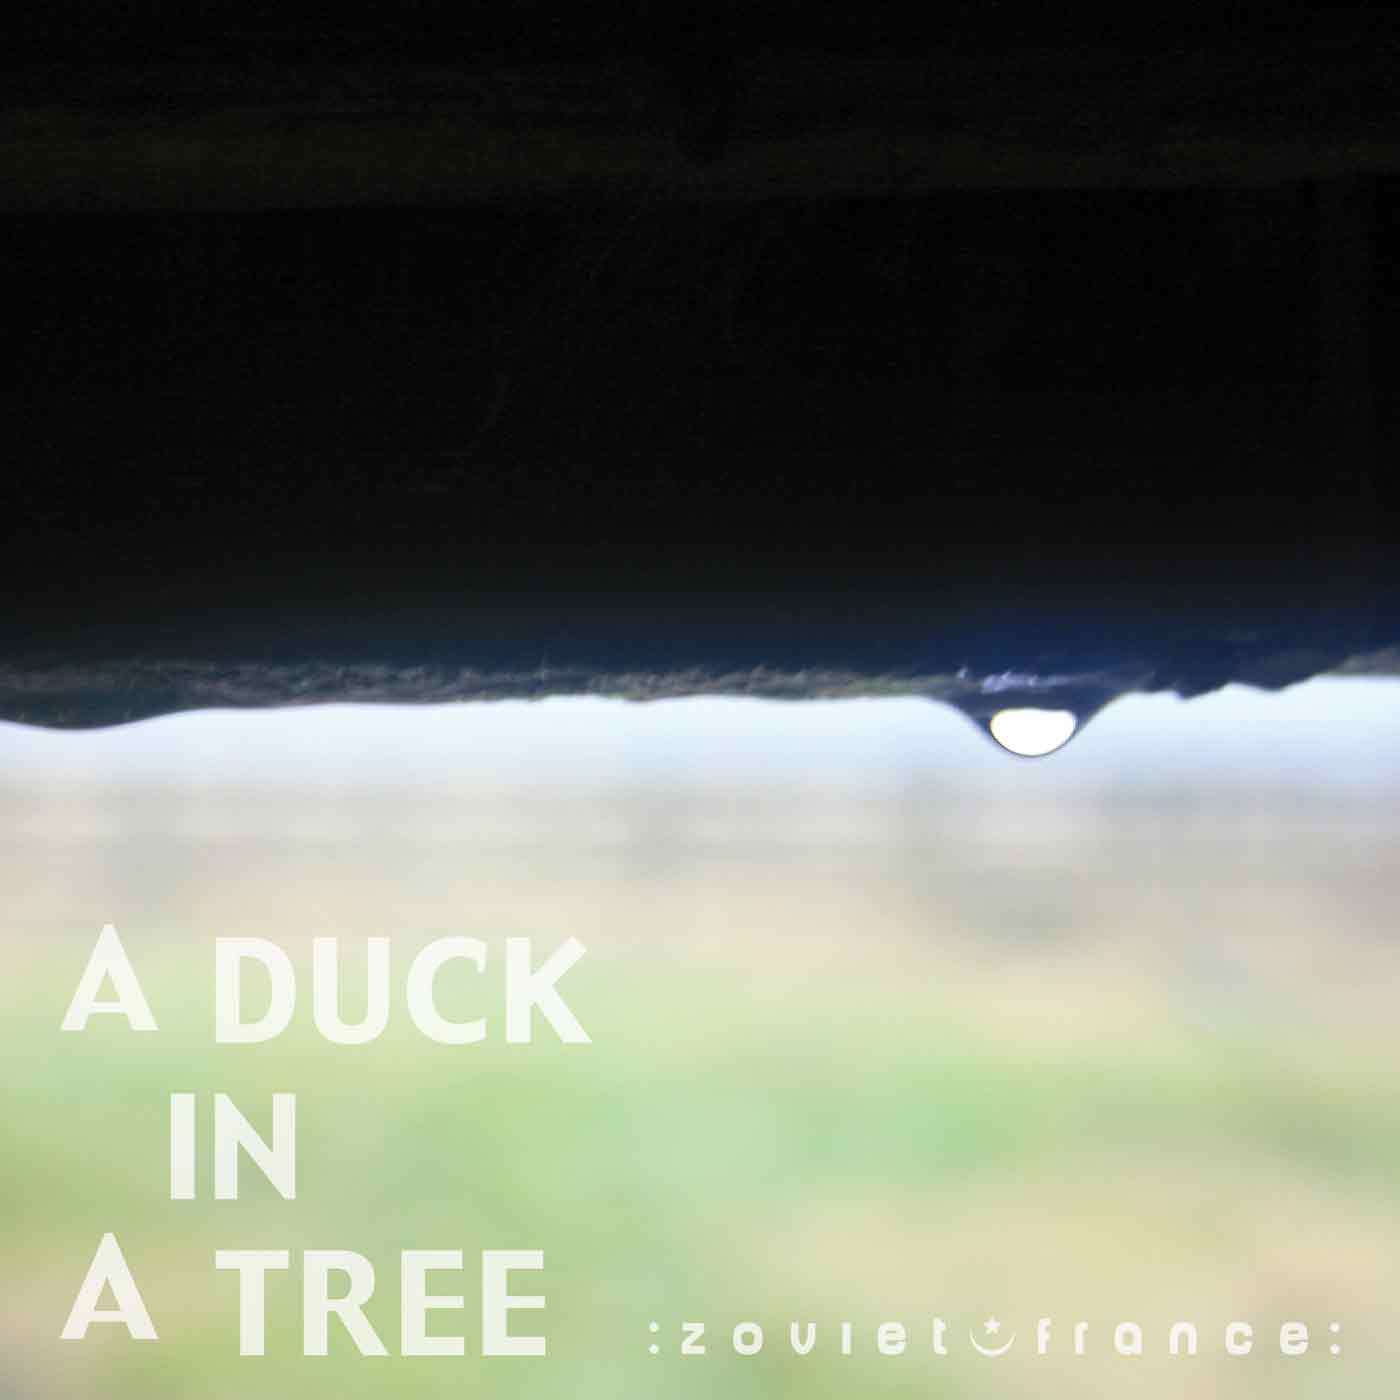 A-Duck-in-a-Tree-2013-05-25-_-Before-and-After-Silence-layout-1400.jpg